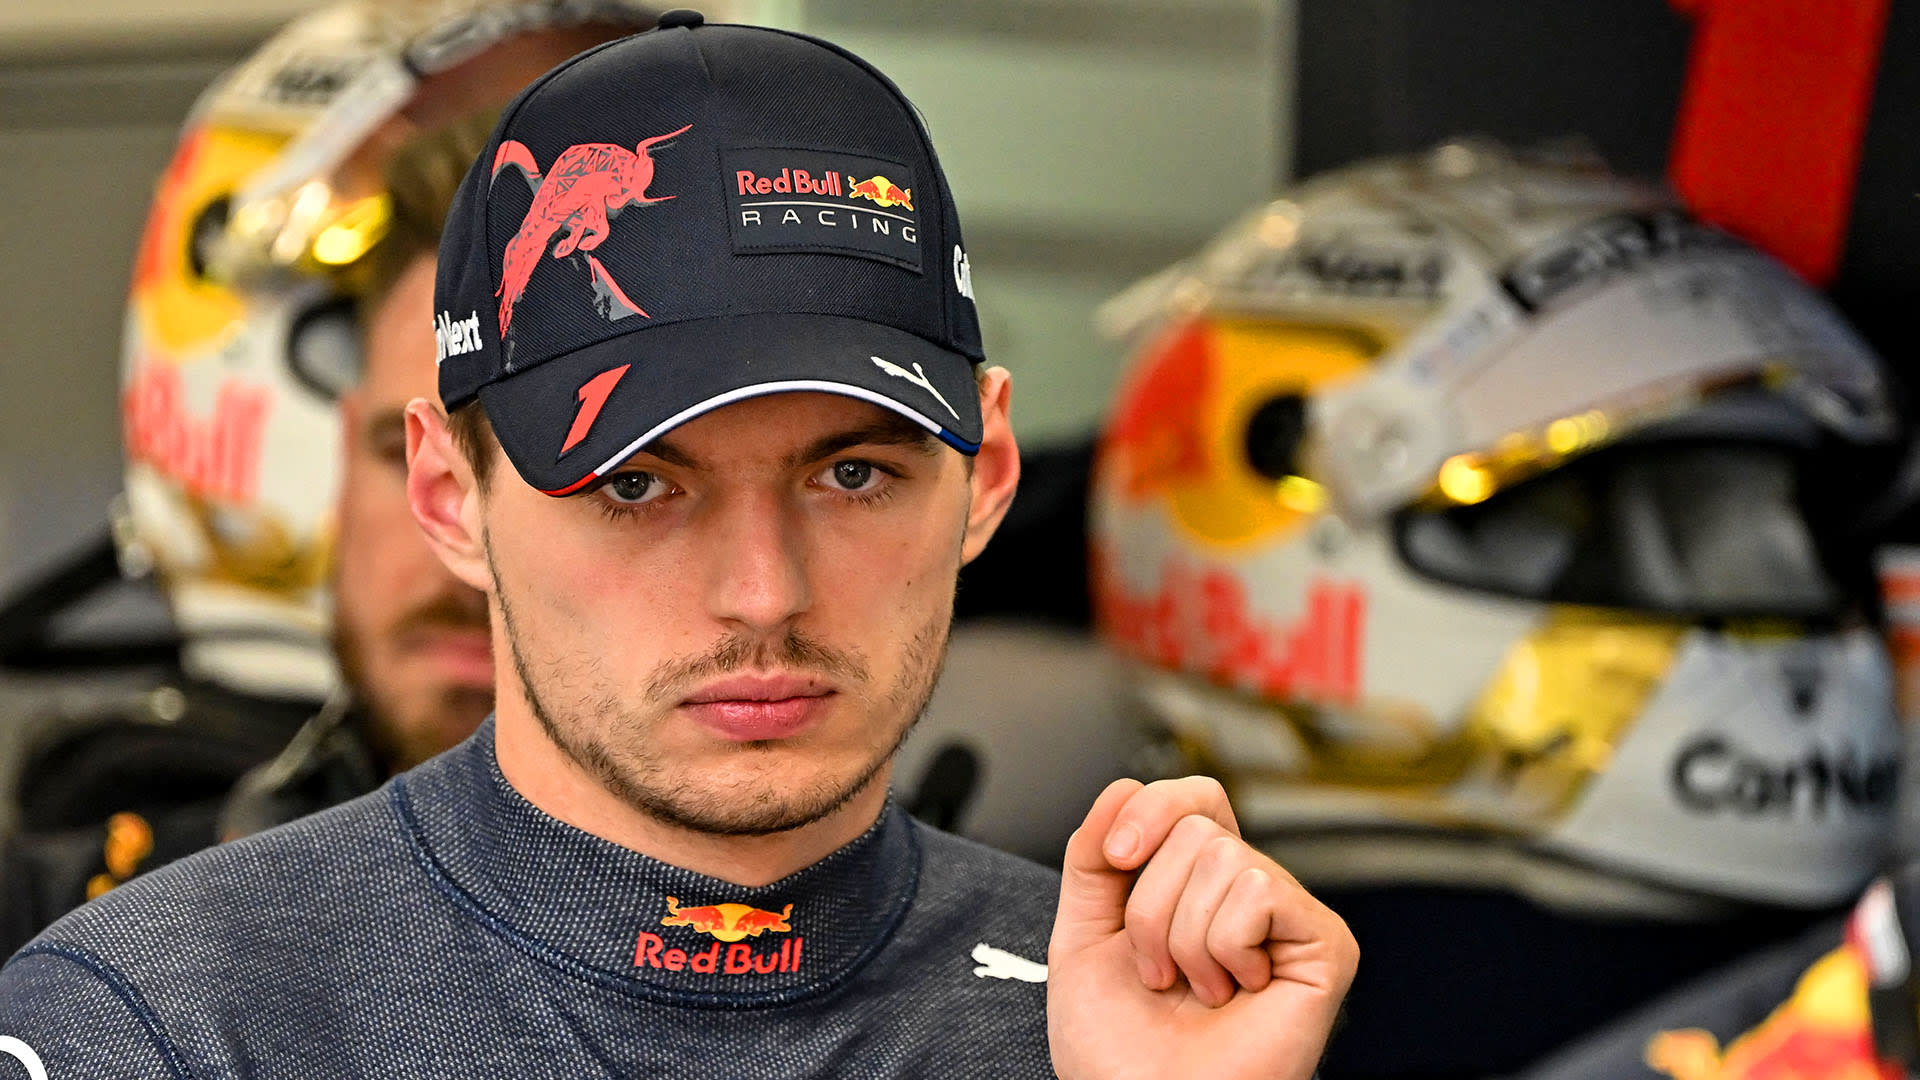 ‘It will be hard for us to beat Ferrari in the dry’ says Verstappen ...